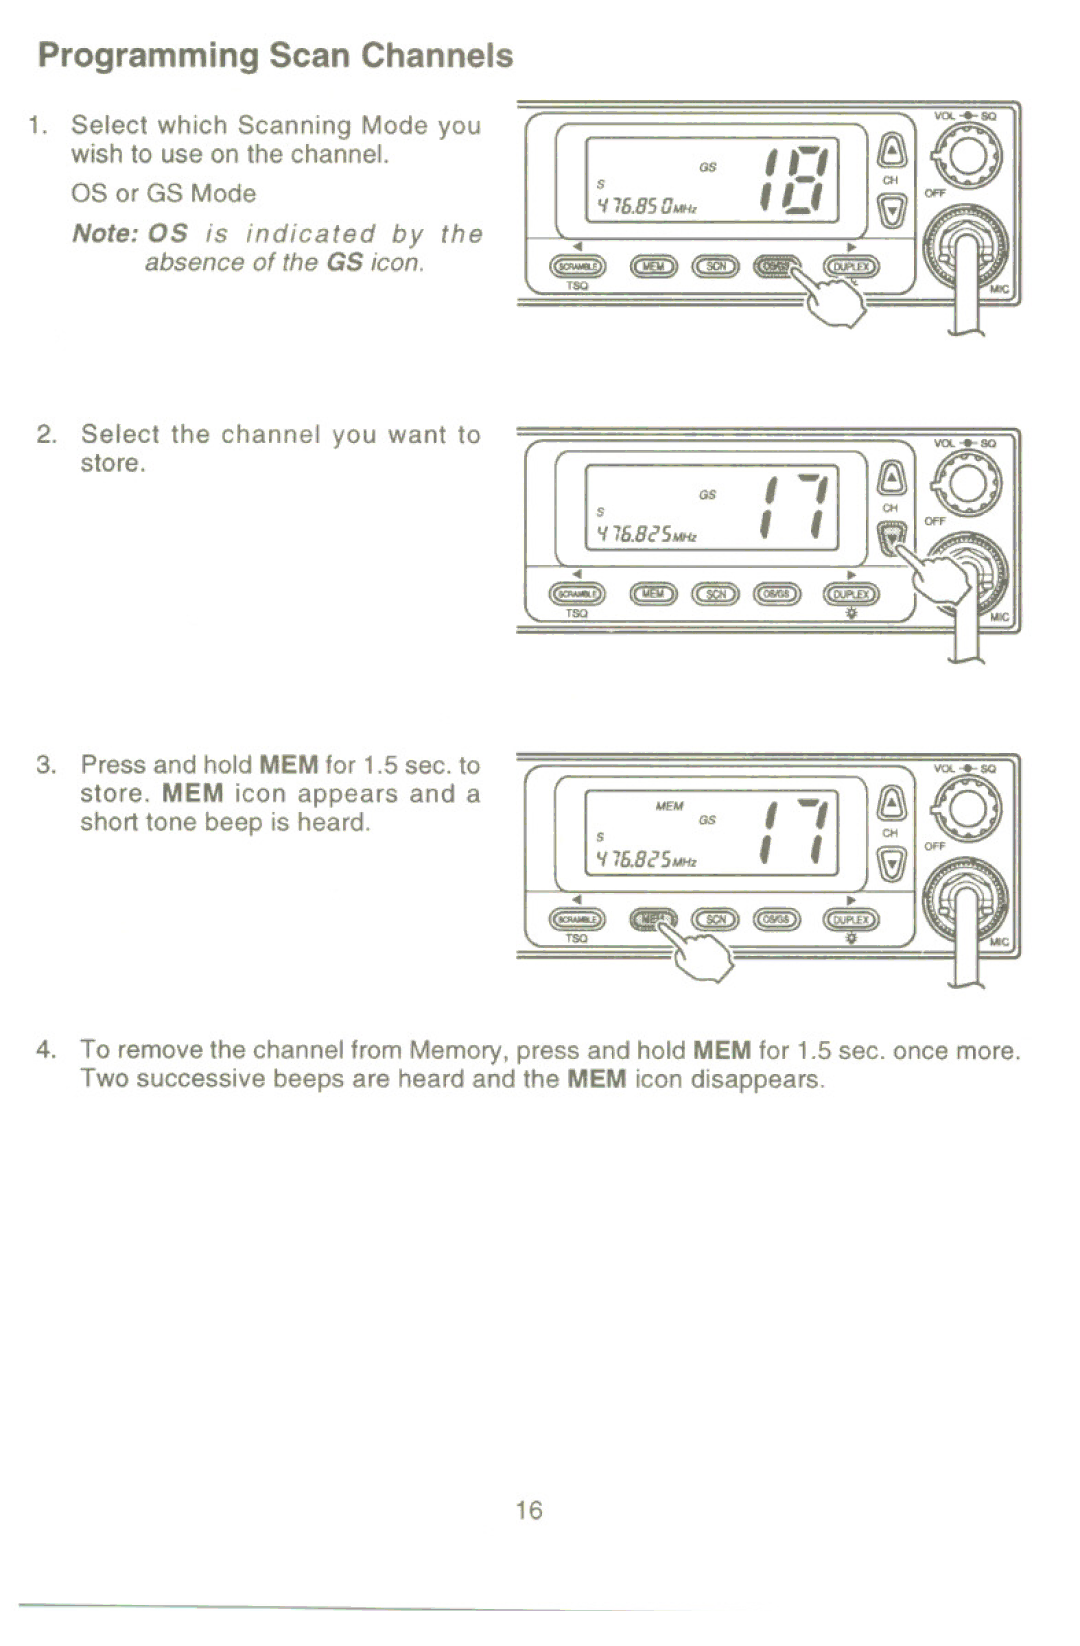 Uniden UH-100 owner manual ~ ~, Programming Scan Channels 